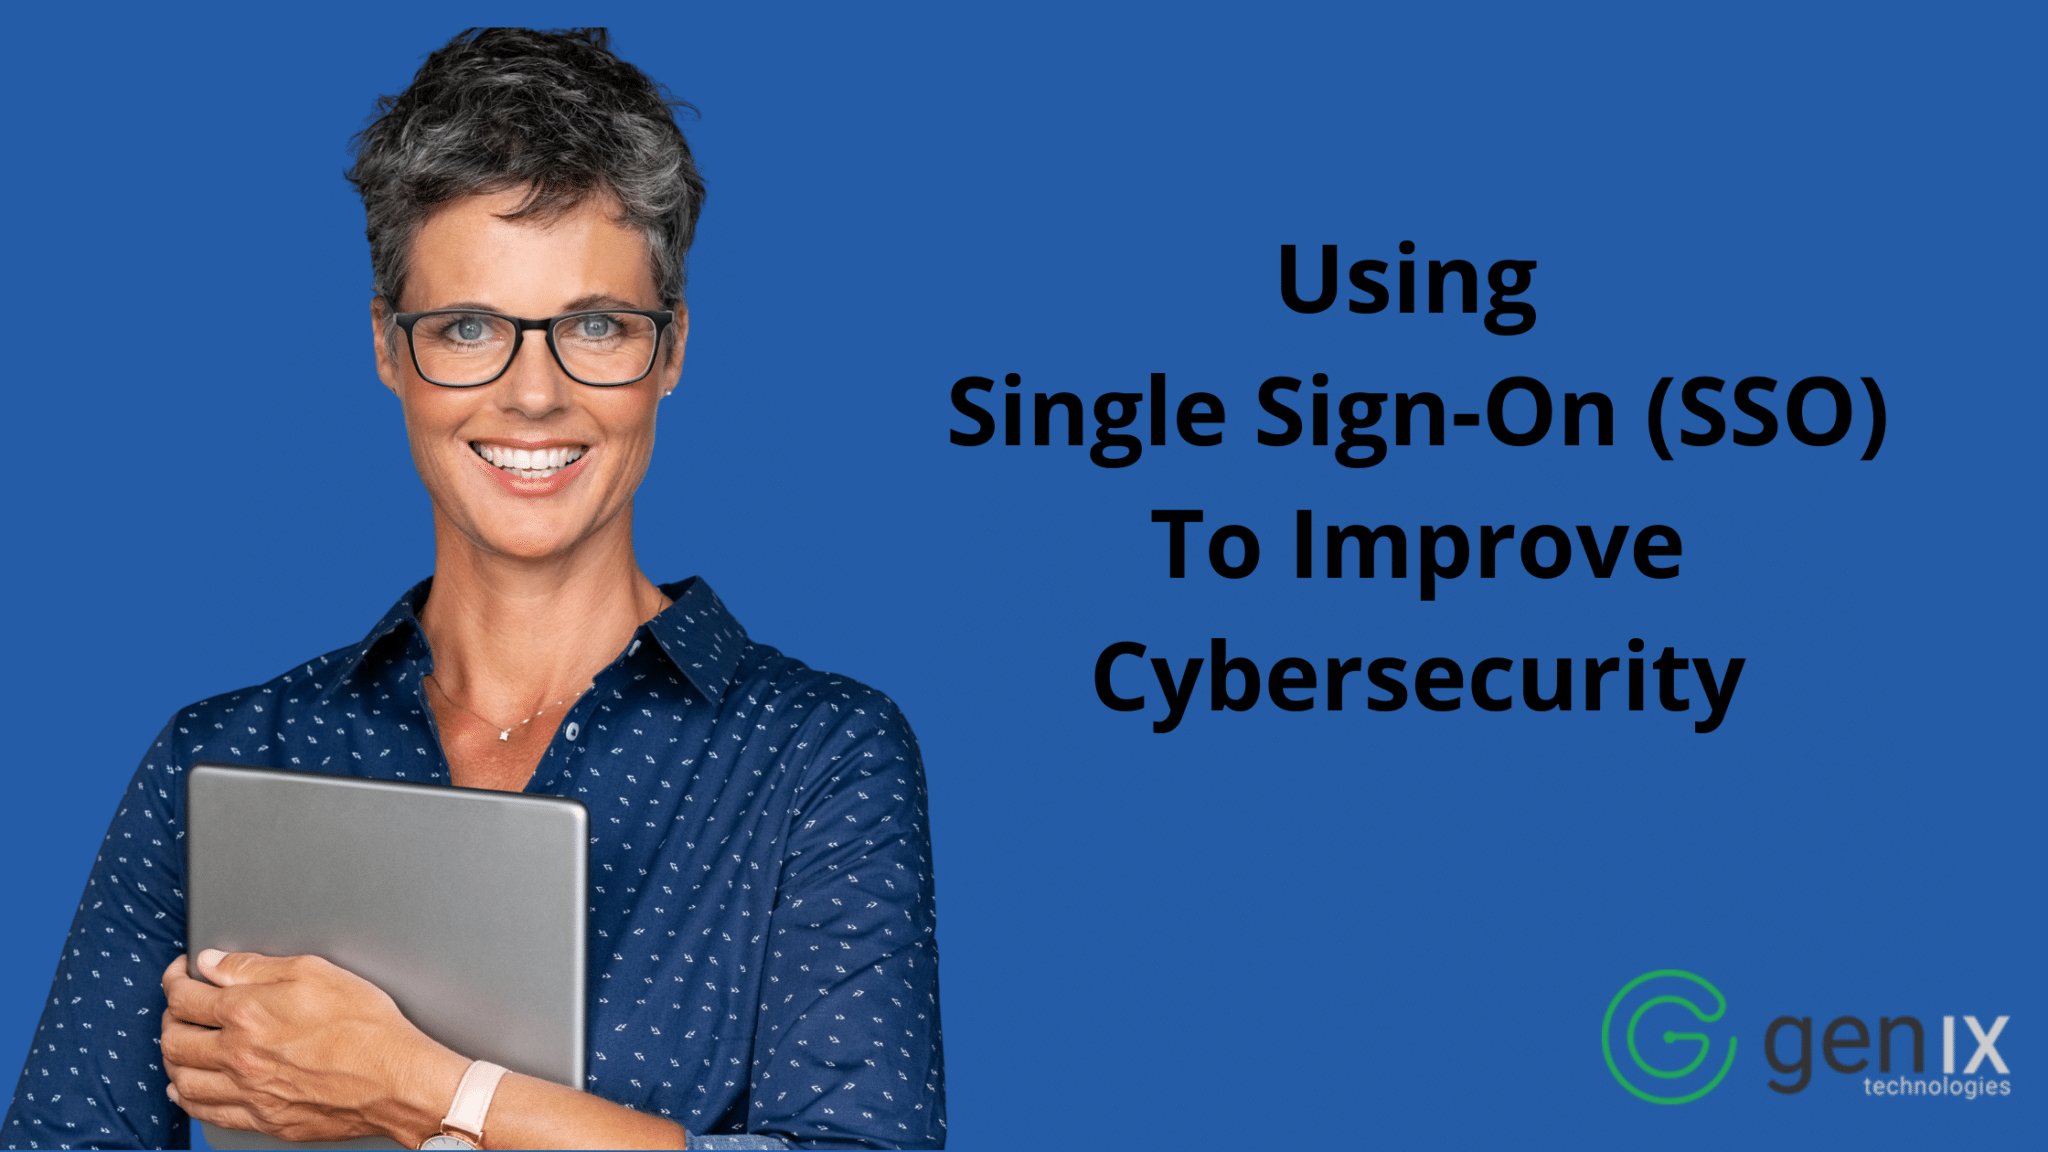 Using Single Sign-On (SSO) to Improve Cybersecurity